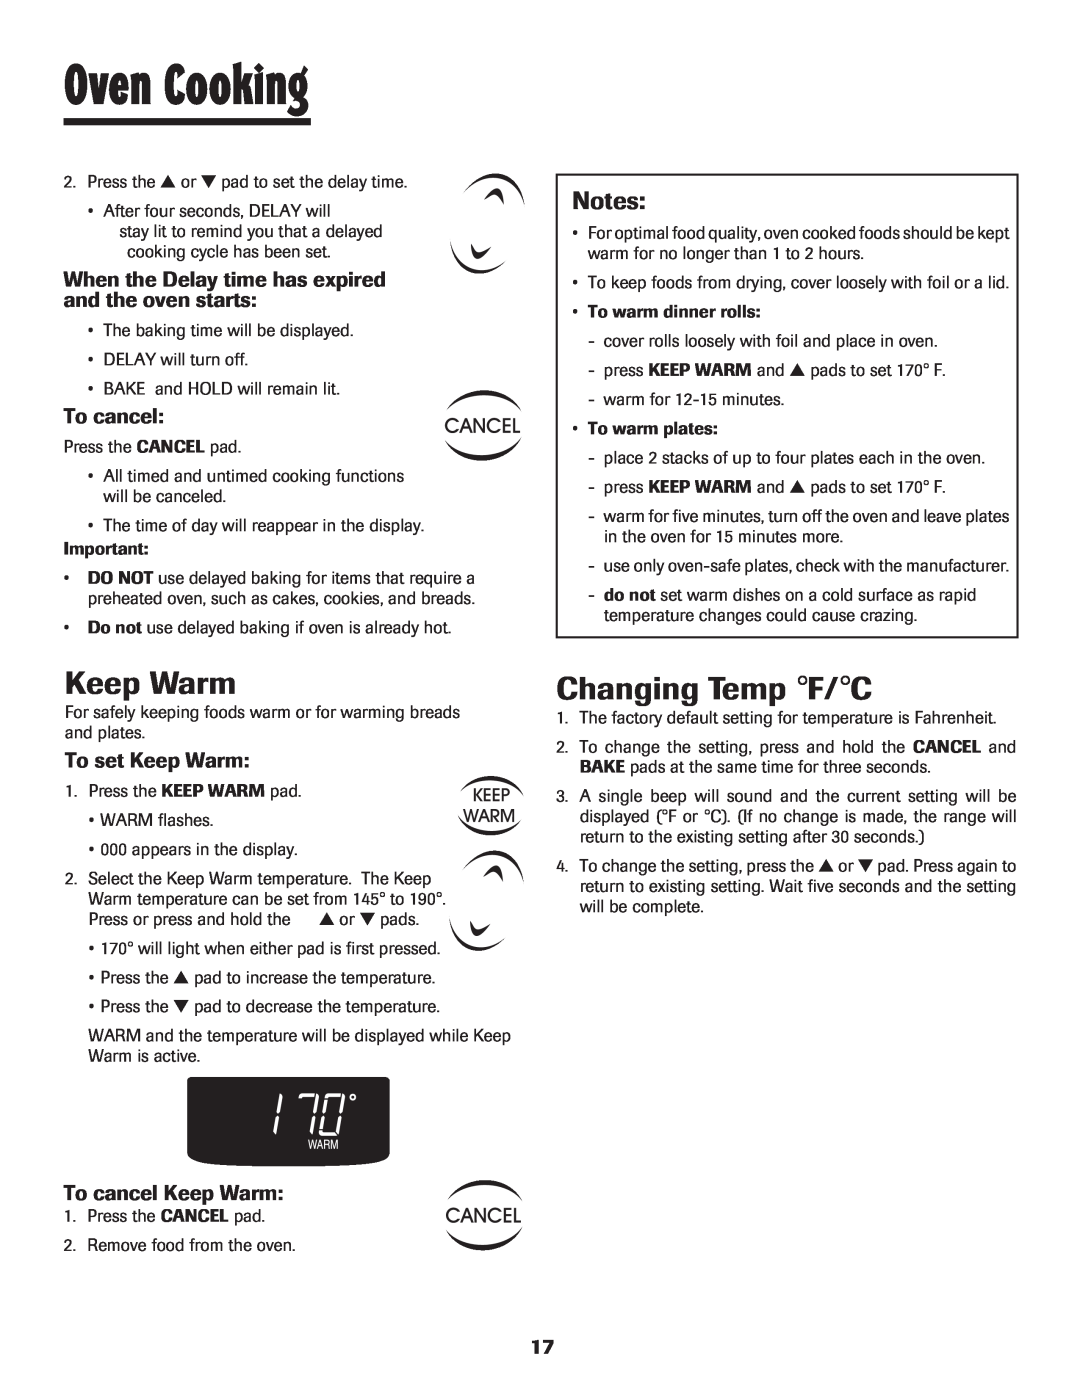 Maytag 500 Changing Temp F/C, To set Keep Warm, To cancel Keep Warm, Oven Cooking, Notes 